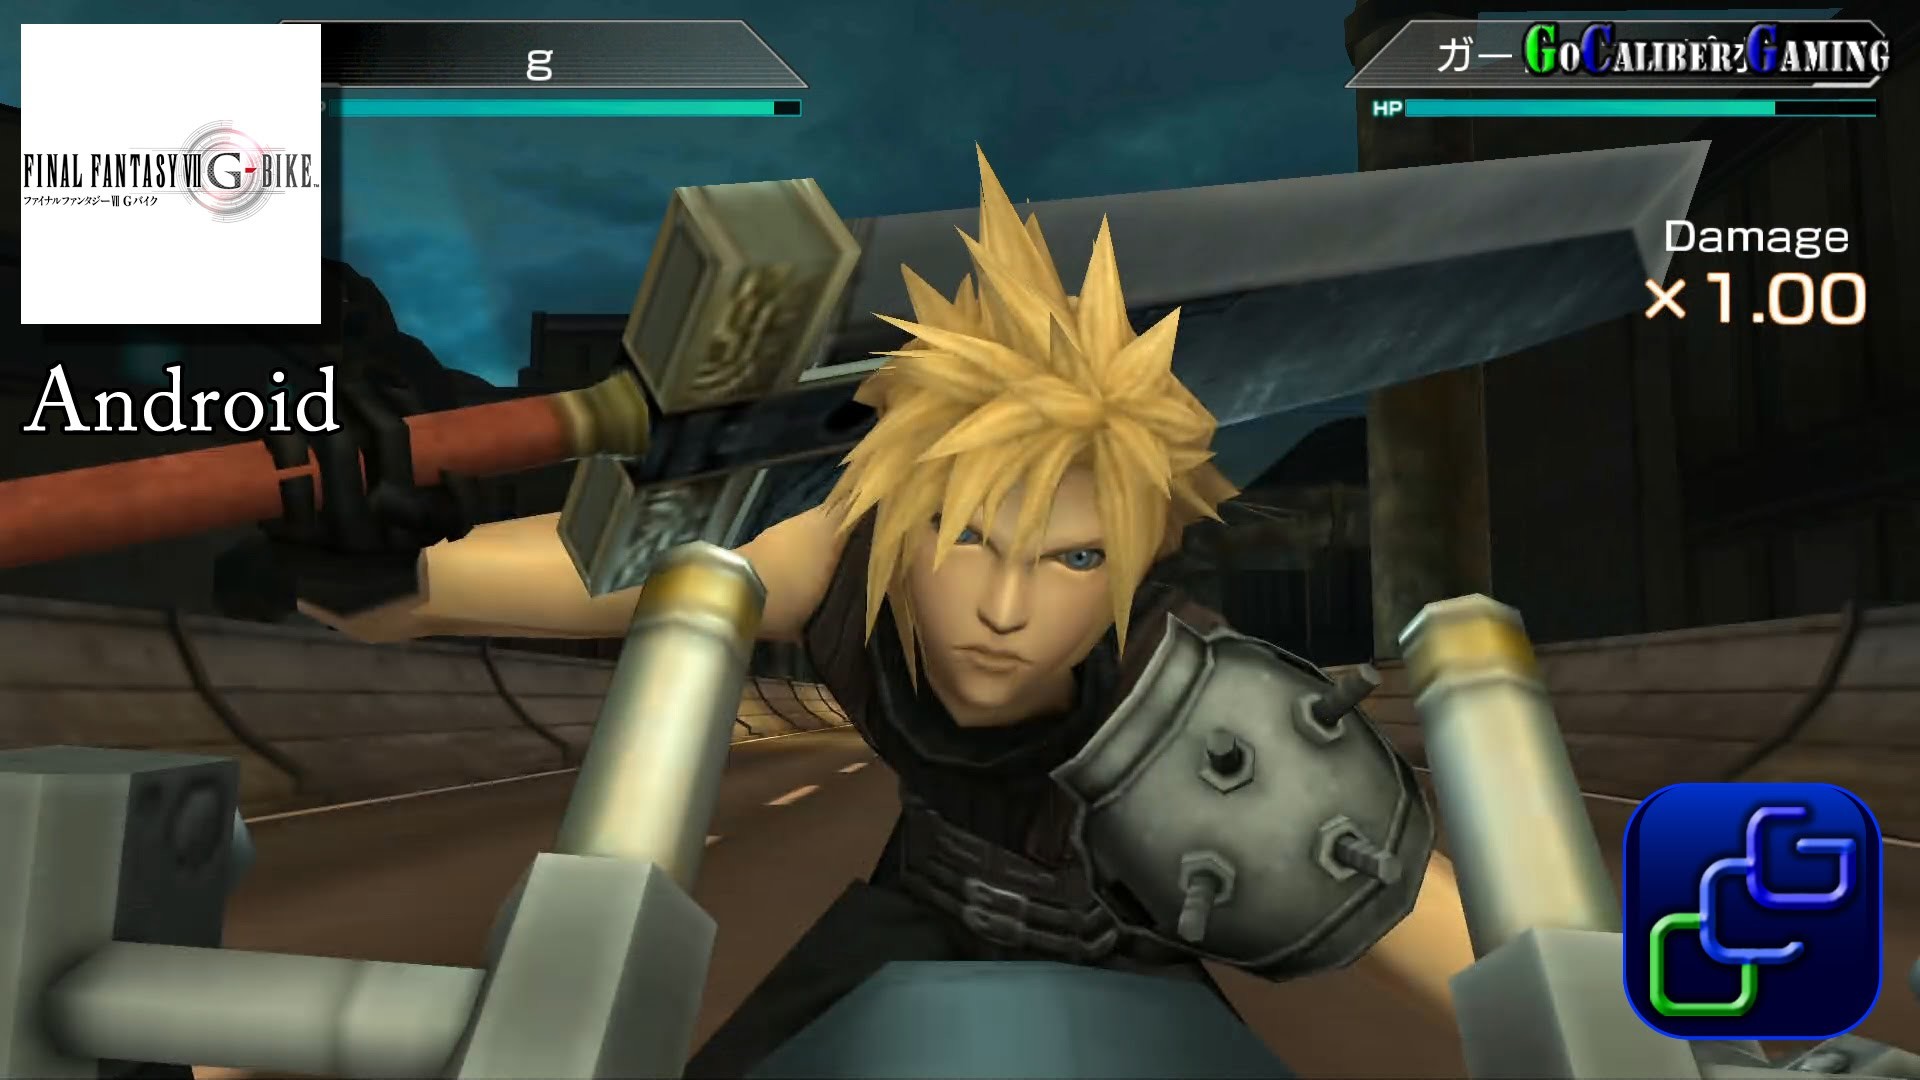 1920x1080 Final Fantasy VII G-Bike Android Gameplay - Prologue, Chapter 1 Boss Cloud  Tifa Limit Break - YouTube